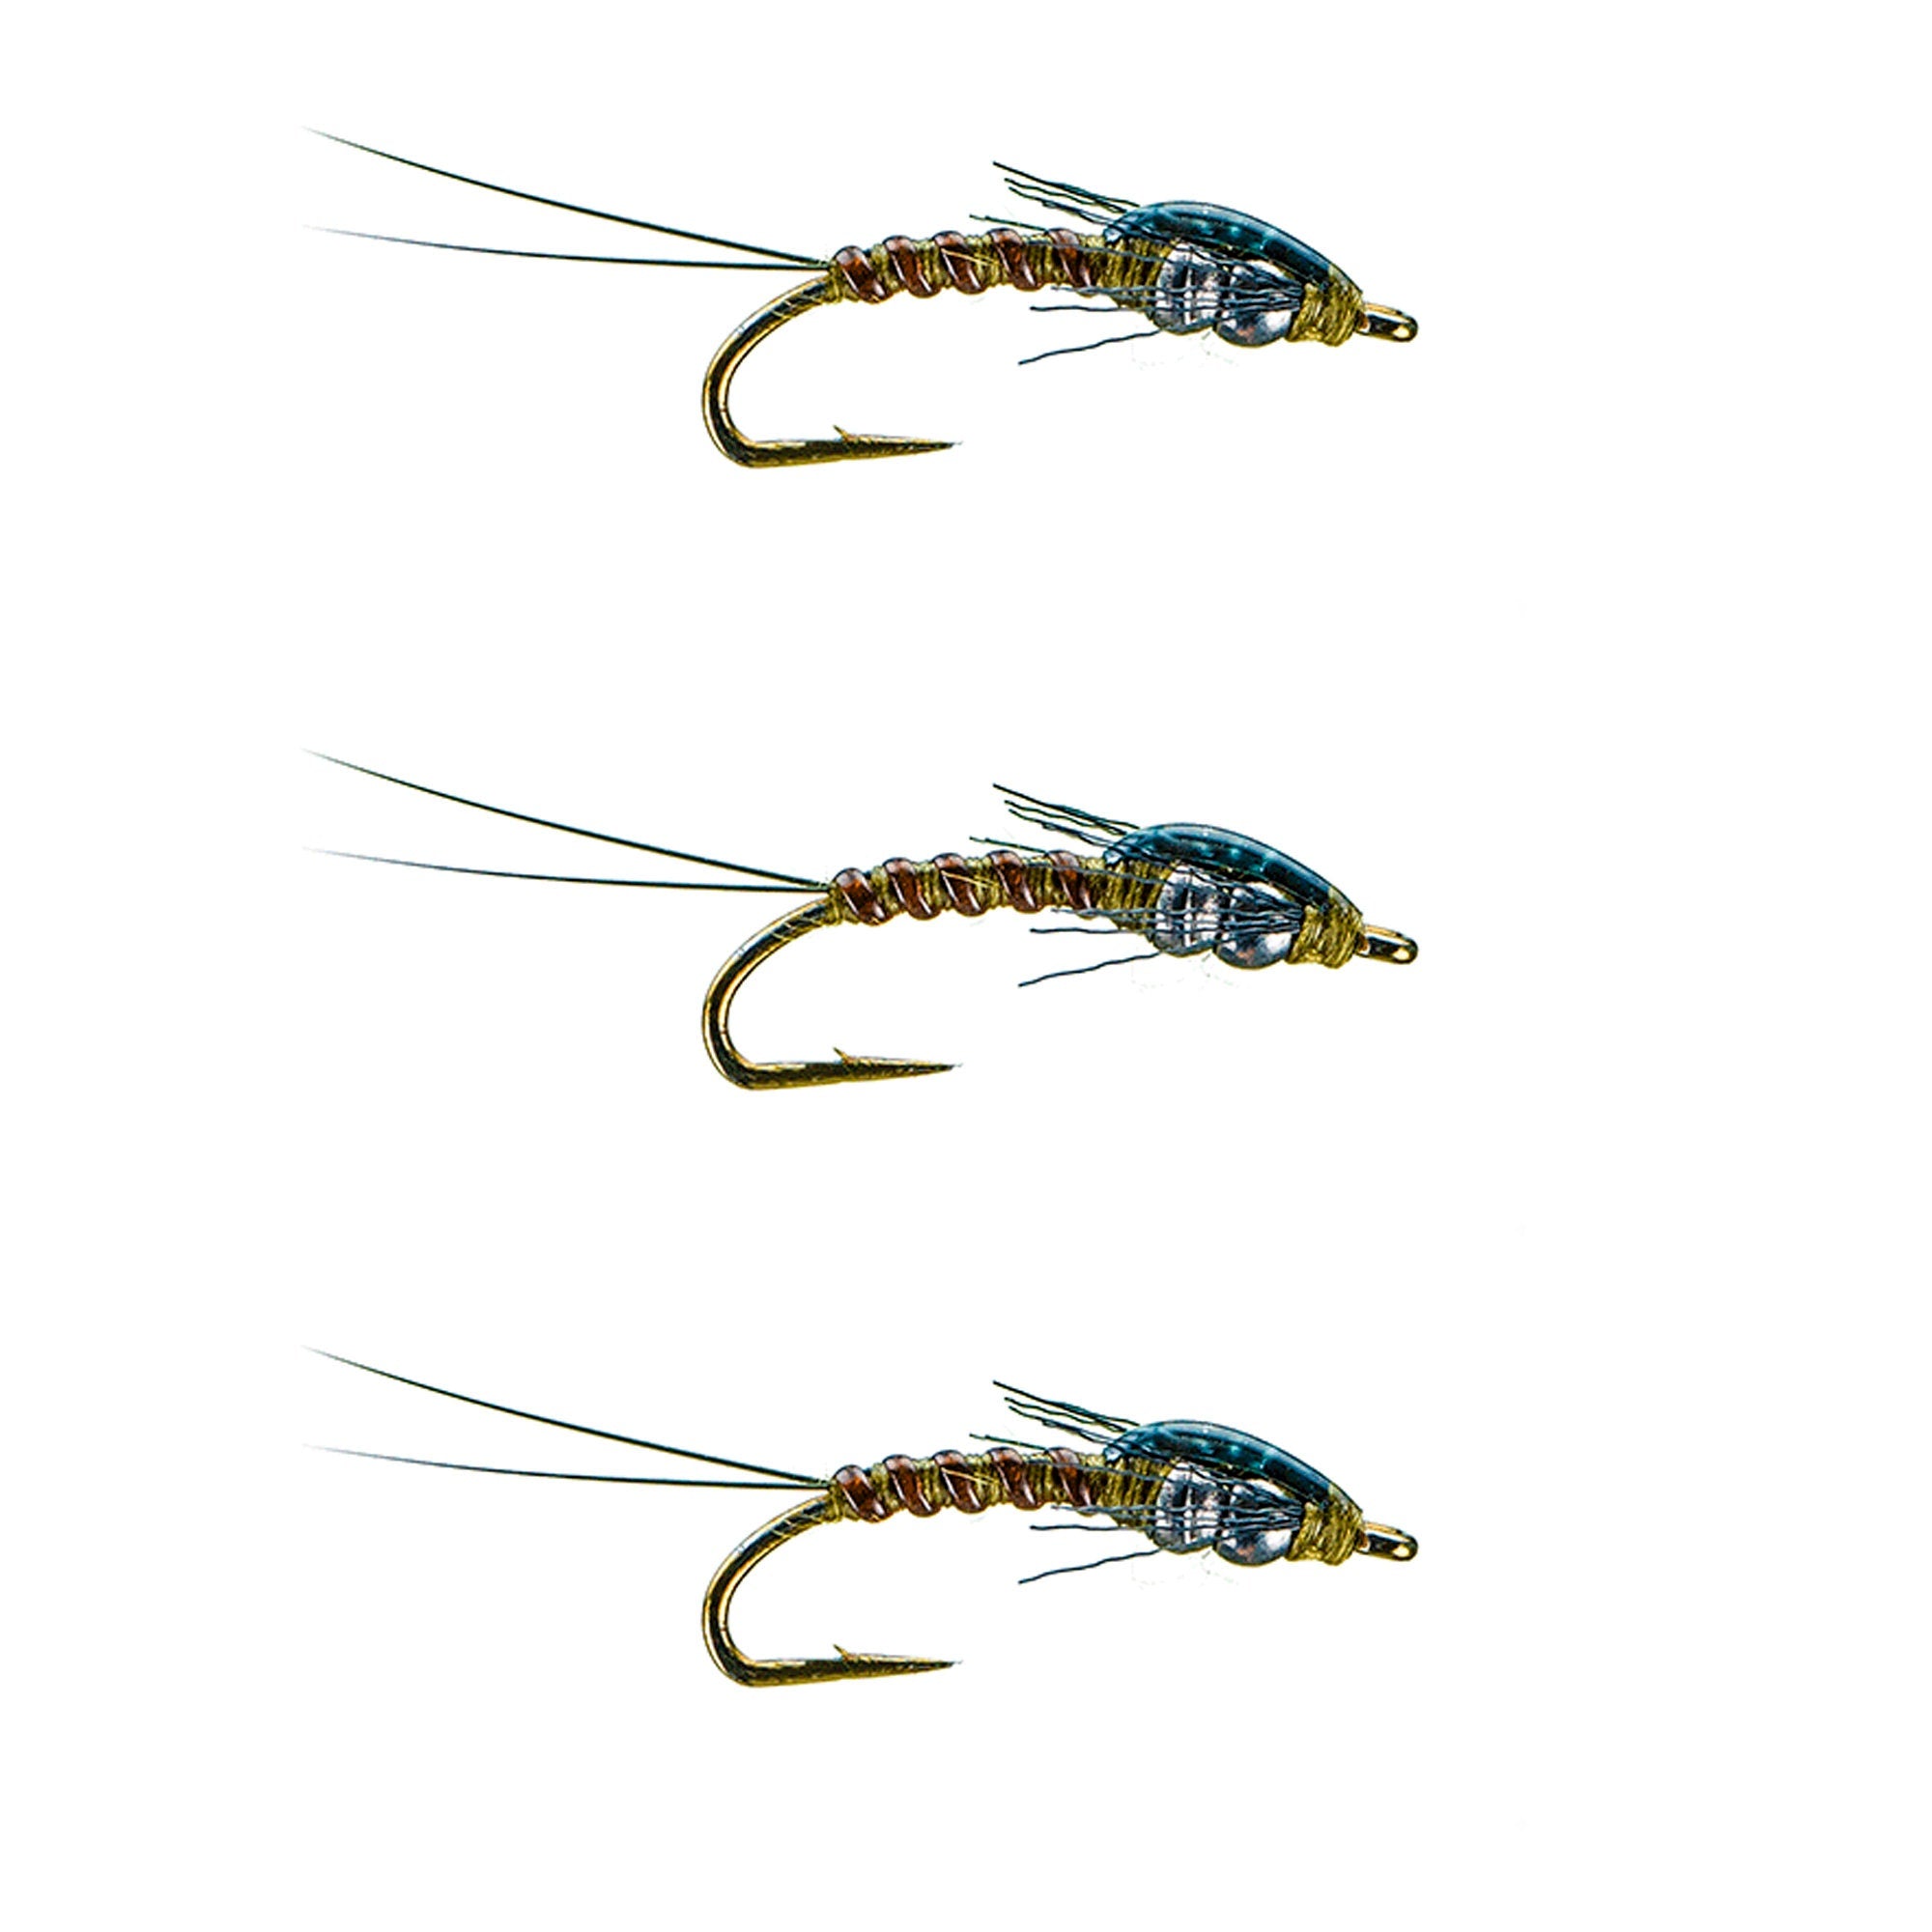 Double Tungsten BWO Nymph